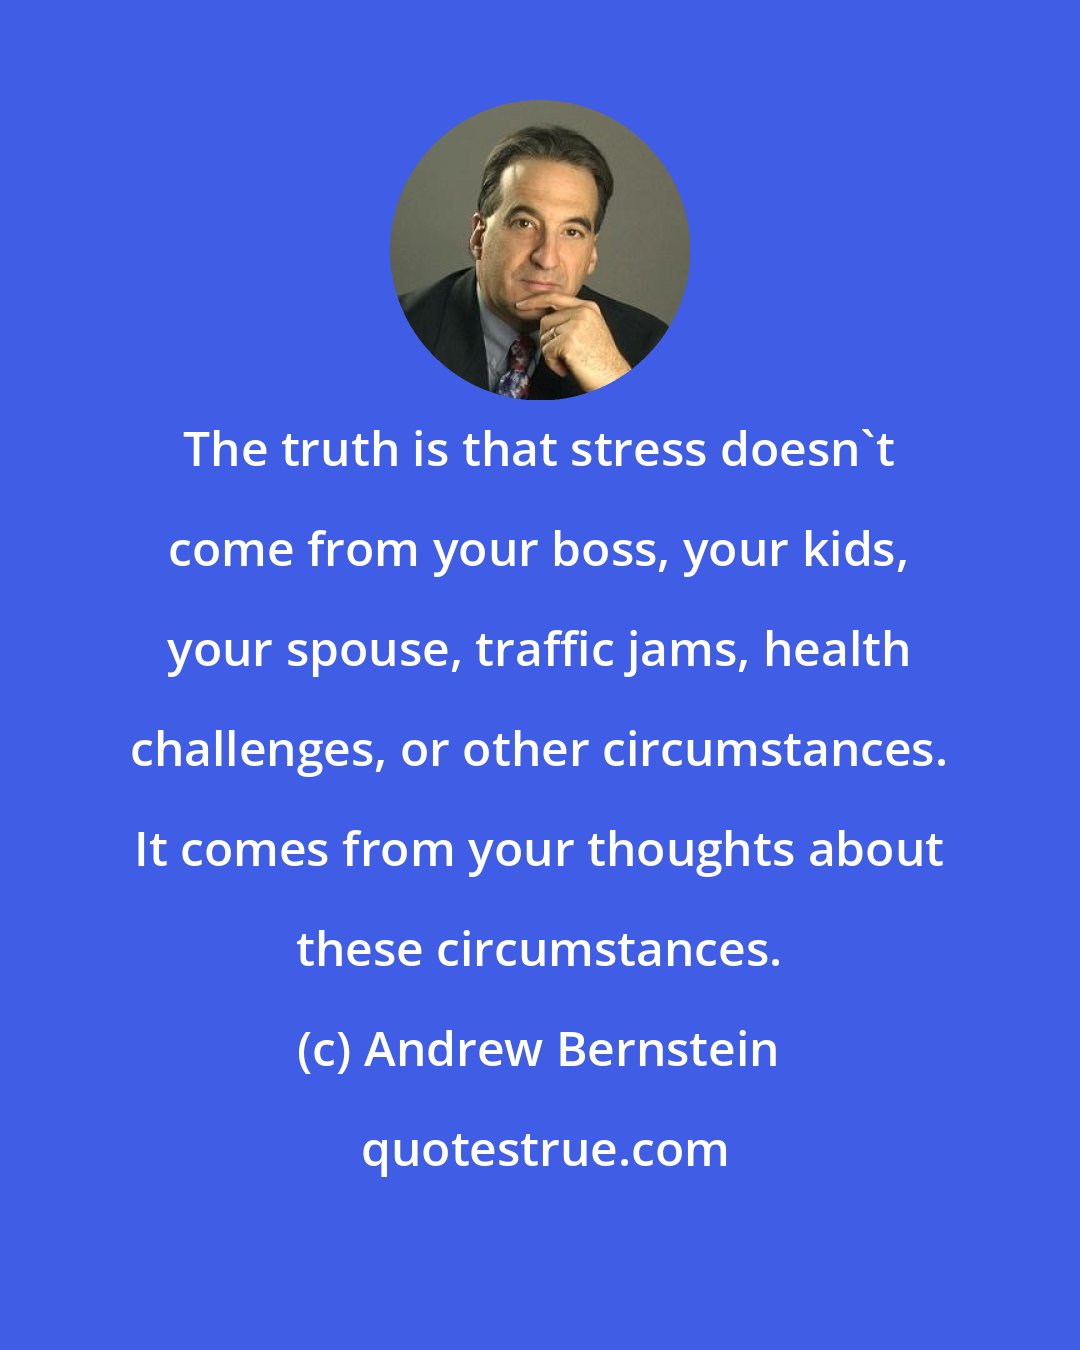 Andrew Bernstein: The truth is that stress doesn't come from your boss, your kids, your spouse, traffic jams, health challenges, or other circumstances. It comes from your thoughts about these circumstances.